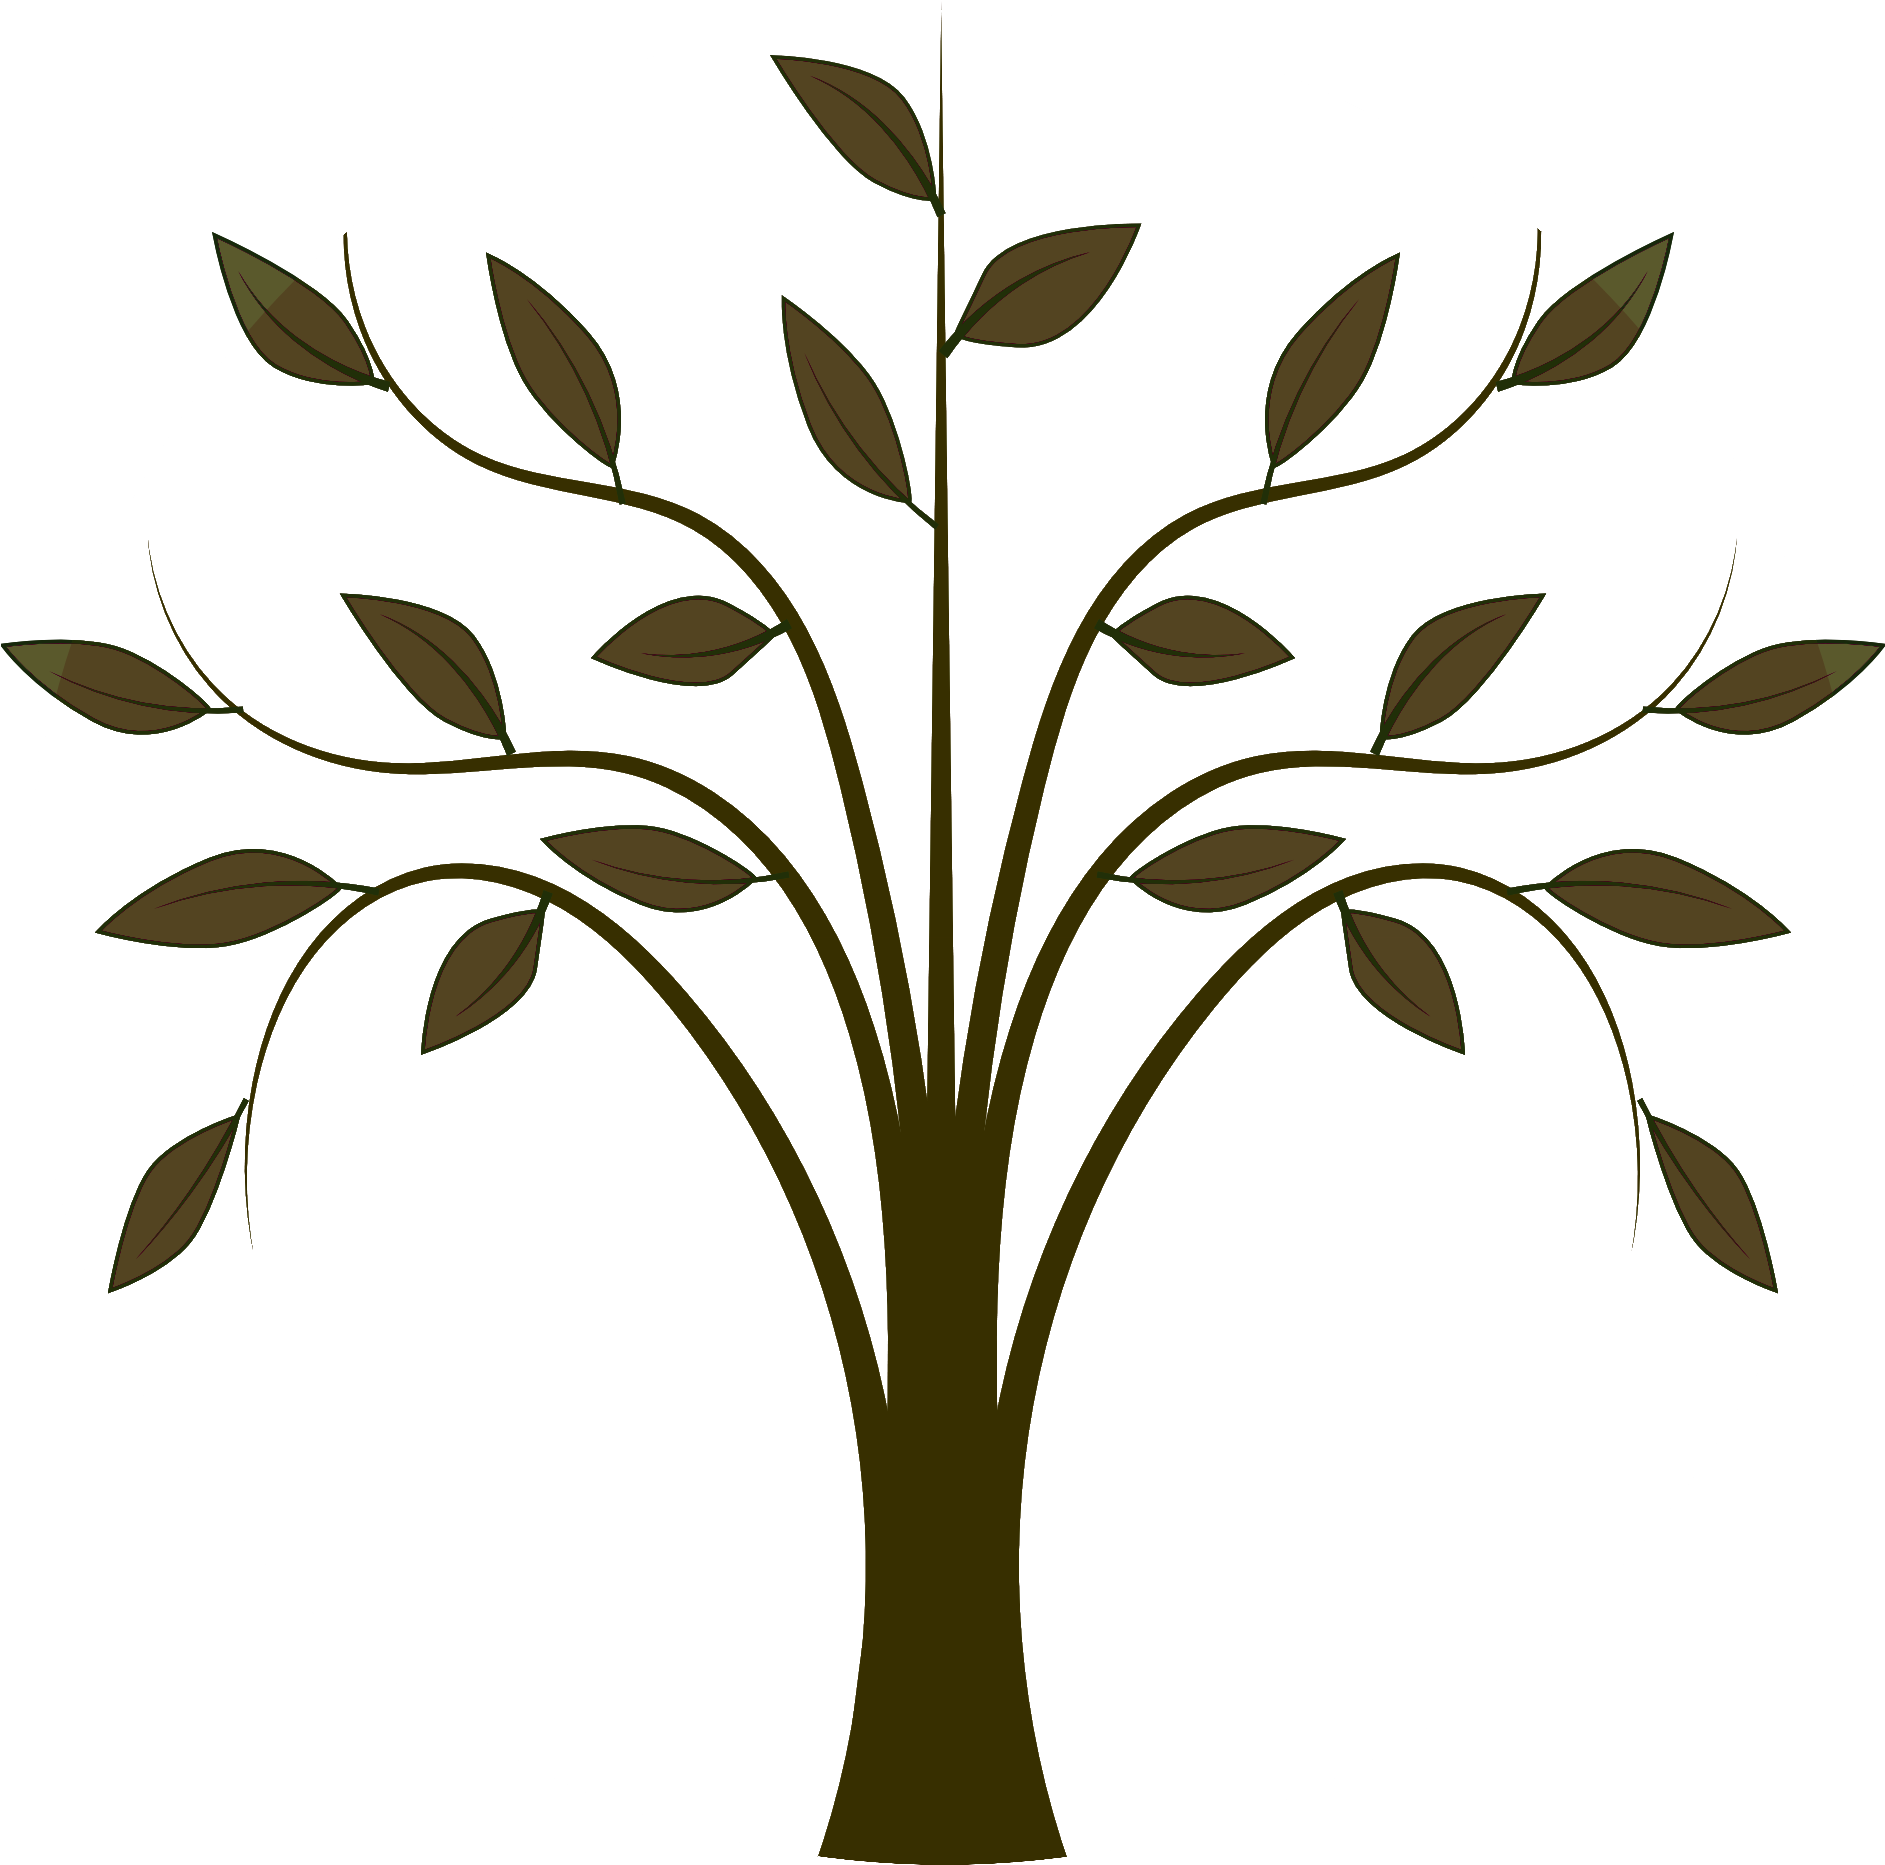 Decline Of Pollinators Threatens Food Supply - Cartoon Tree With Branches (1884x1920)